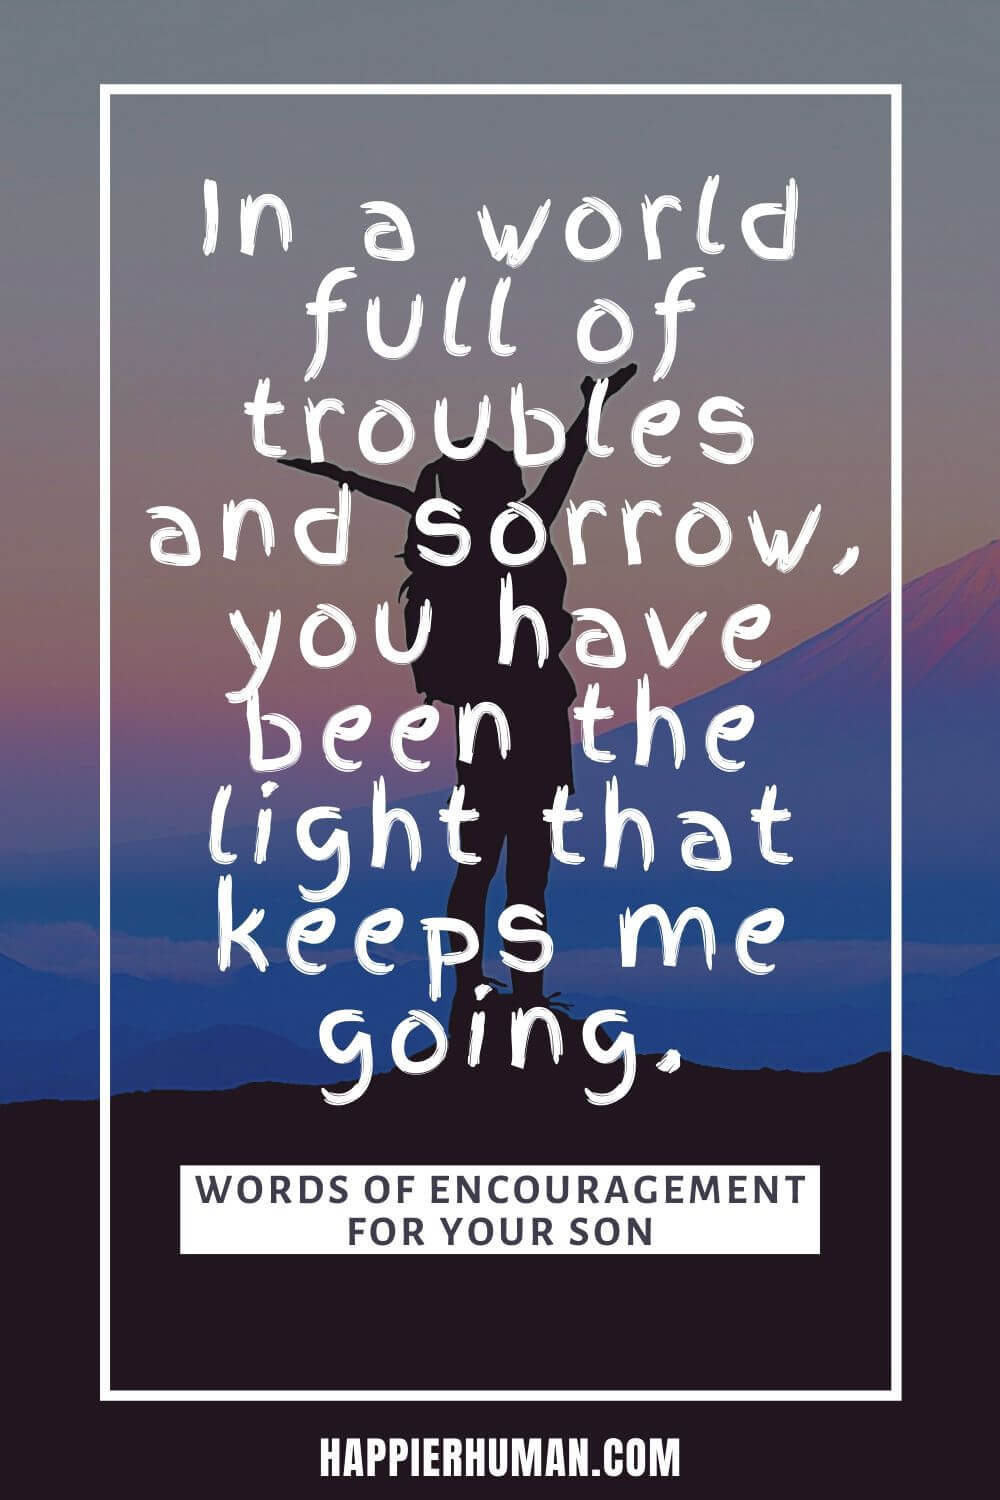 Words of Encouragement for a Son - In a world full of troubles and sorrow, you have been the light that keeps me going. | proud parents quotes for son | words of encouragement for my son in school | proud of my son message #affirmationdaily #dailyaffirmation #affirmationforson